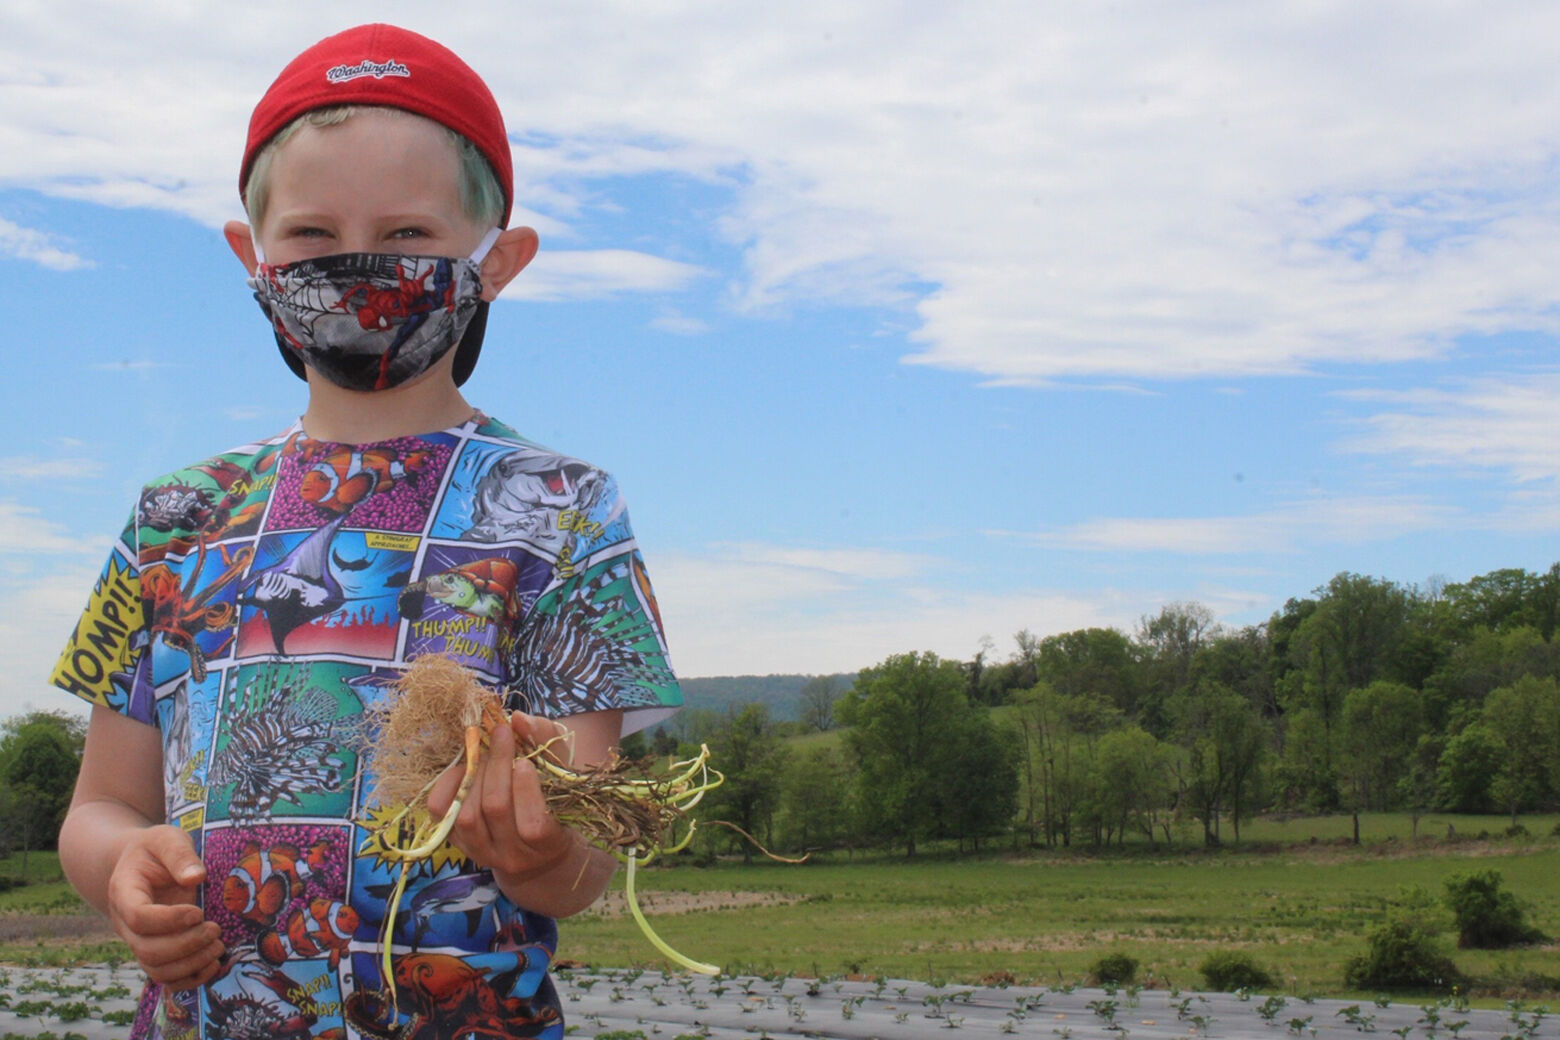 Kid in face mask on a farm.